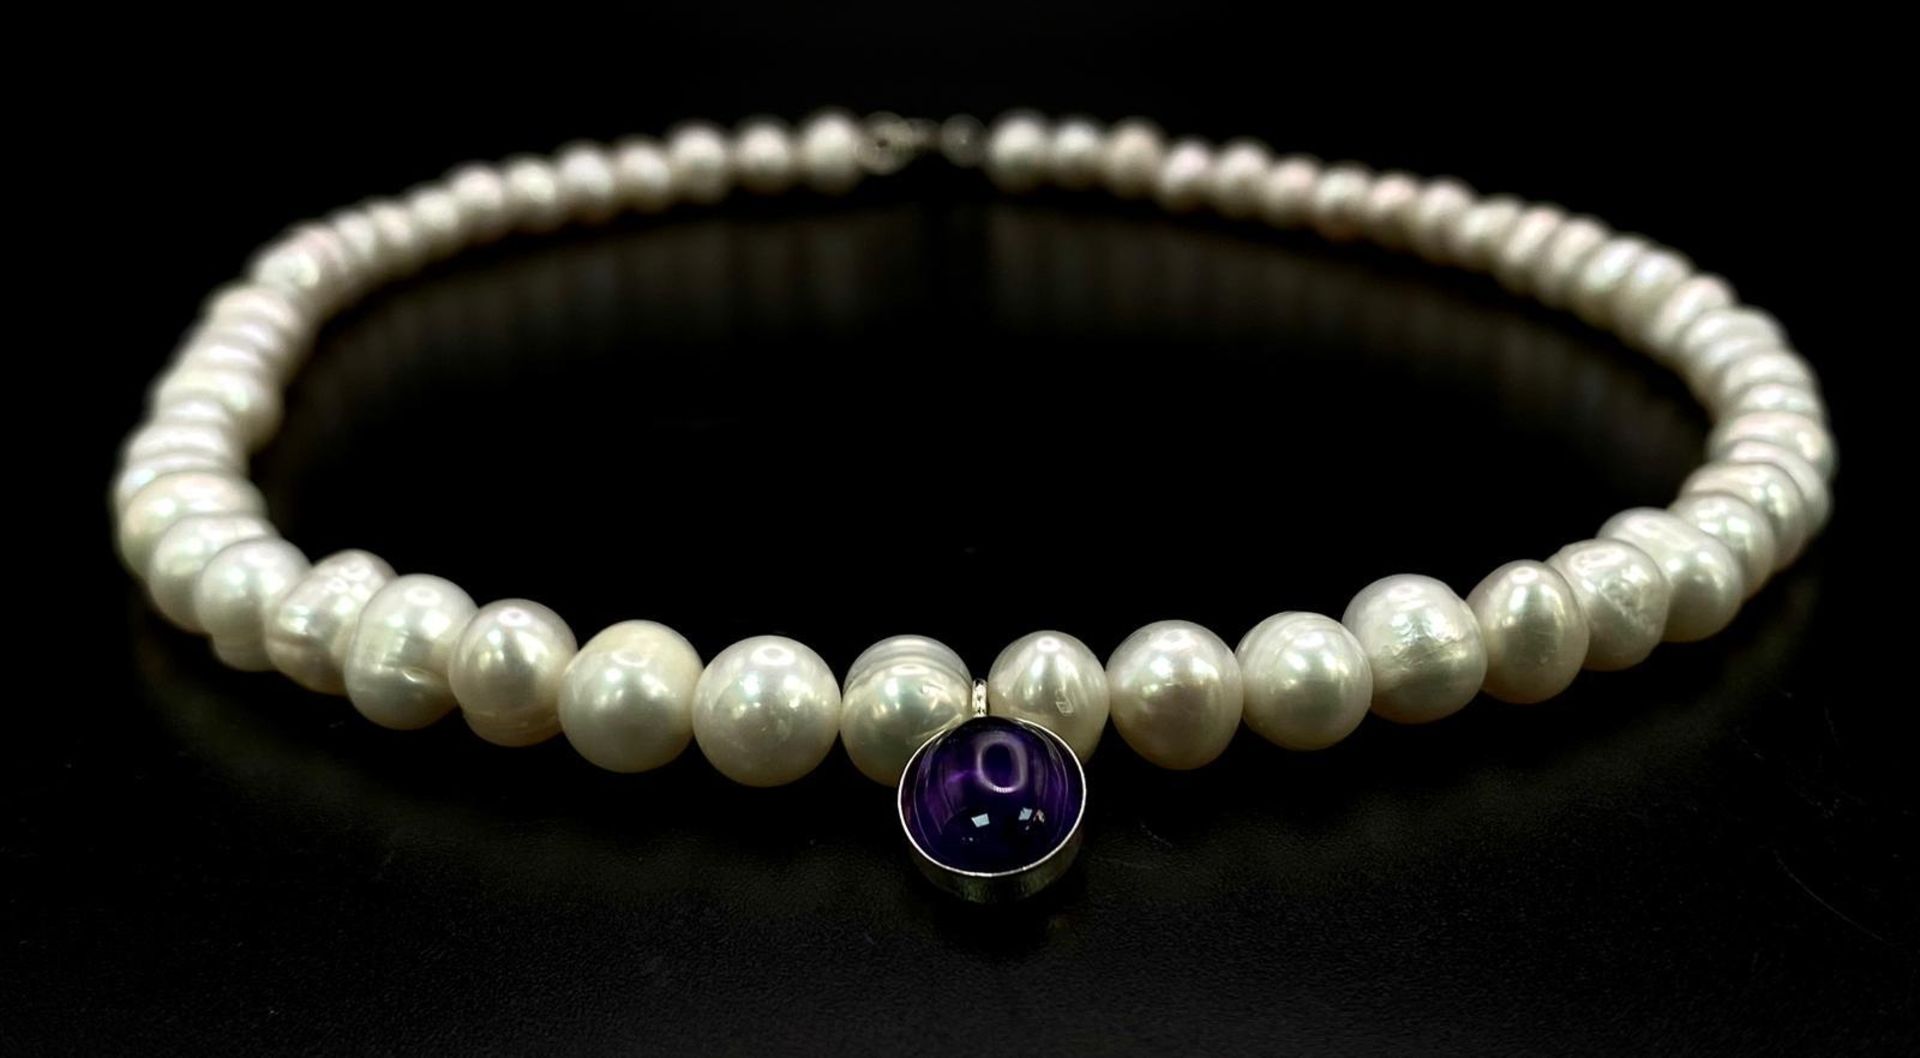 Classic Cultured Pearl Sterling Silver Necklace featuring a rounded Amethyst Stone Pendant. - Bild 4 aus 7